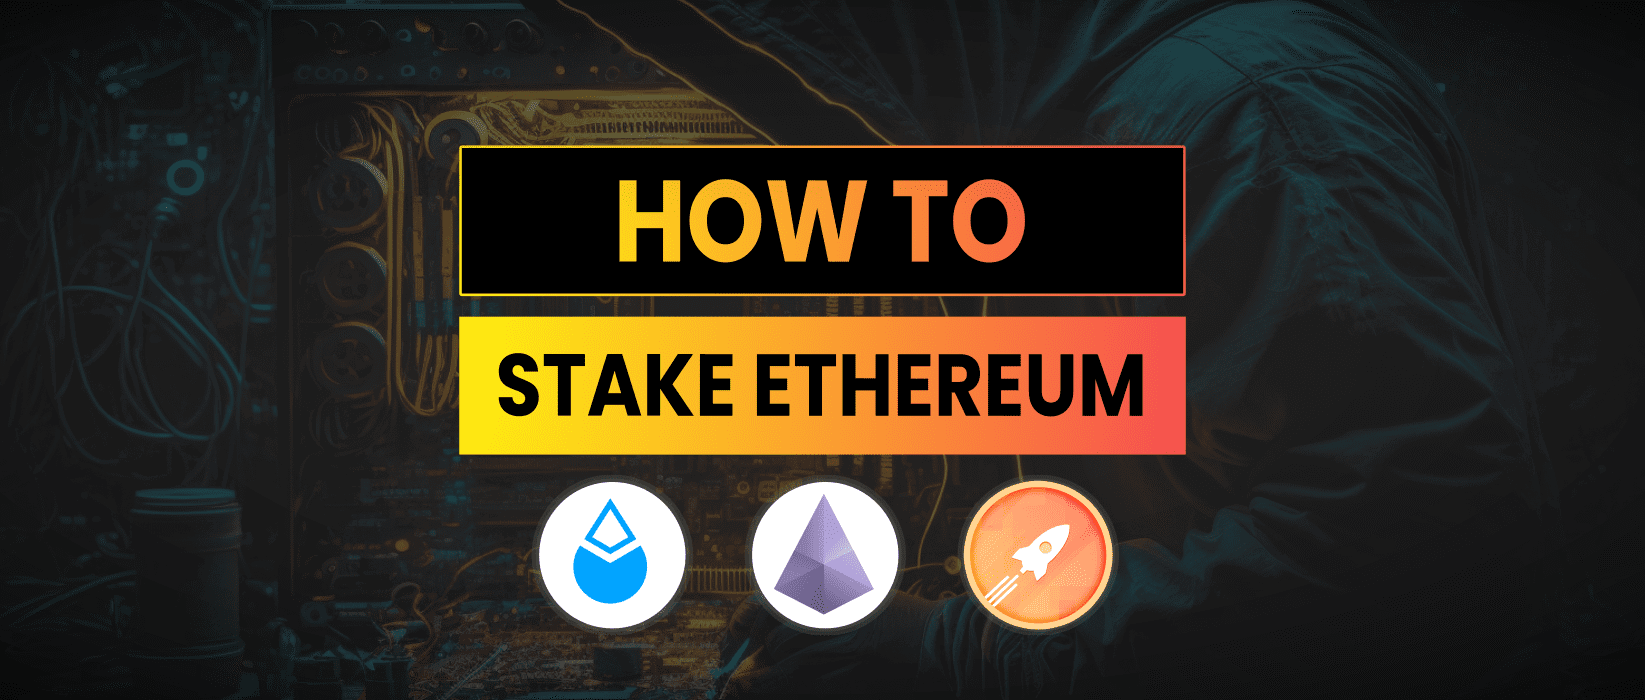 How To Stake Ethereum | Earn More Yield With Ethereum Staking